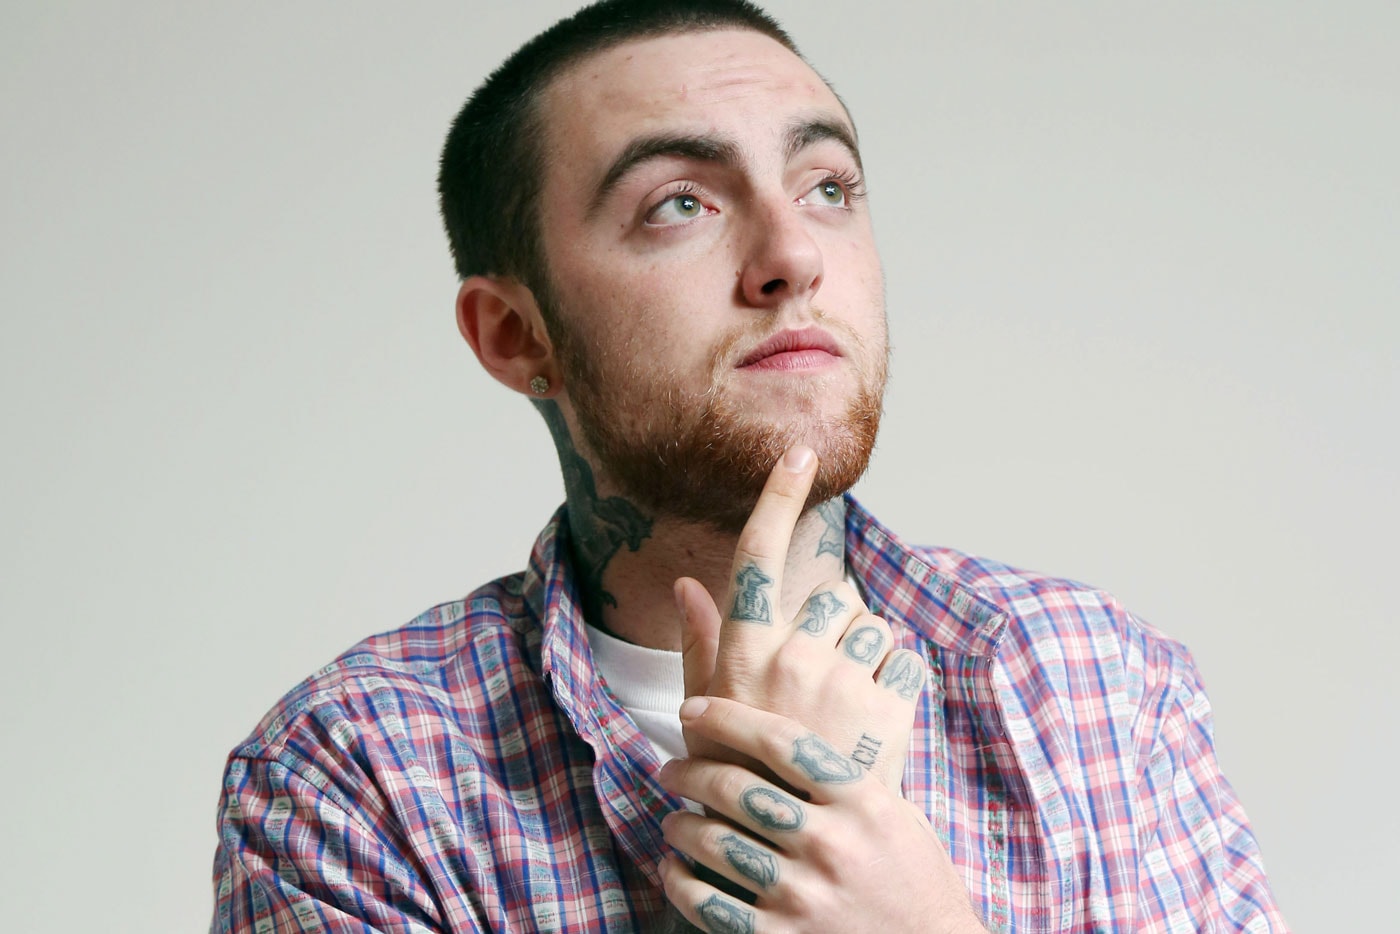 Mac Miller Shares Song "Special" to Him, "Smile"